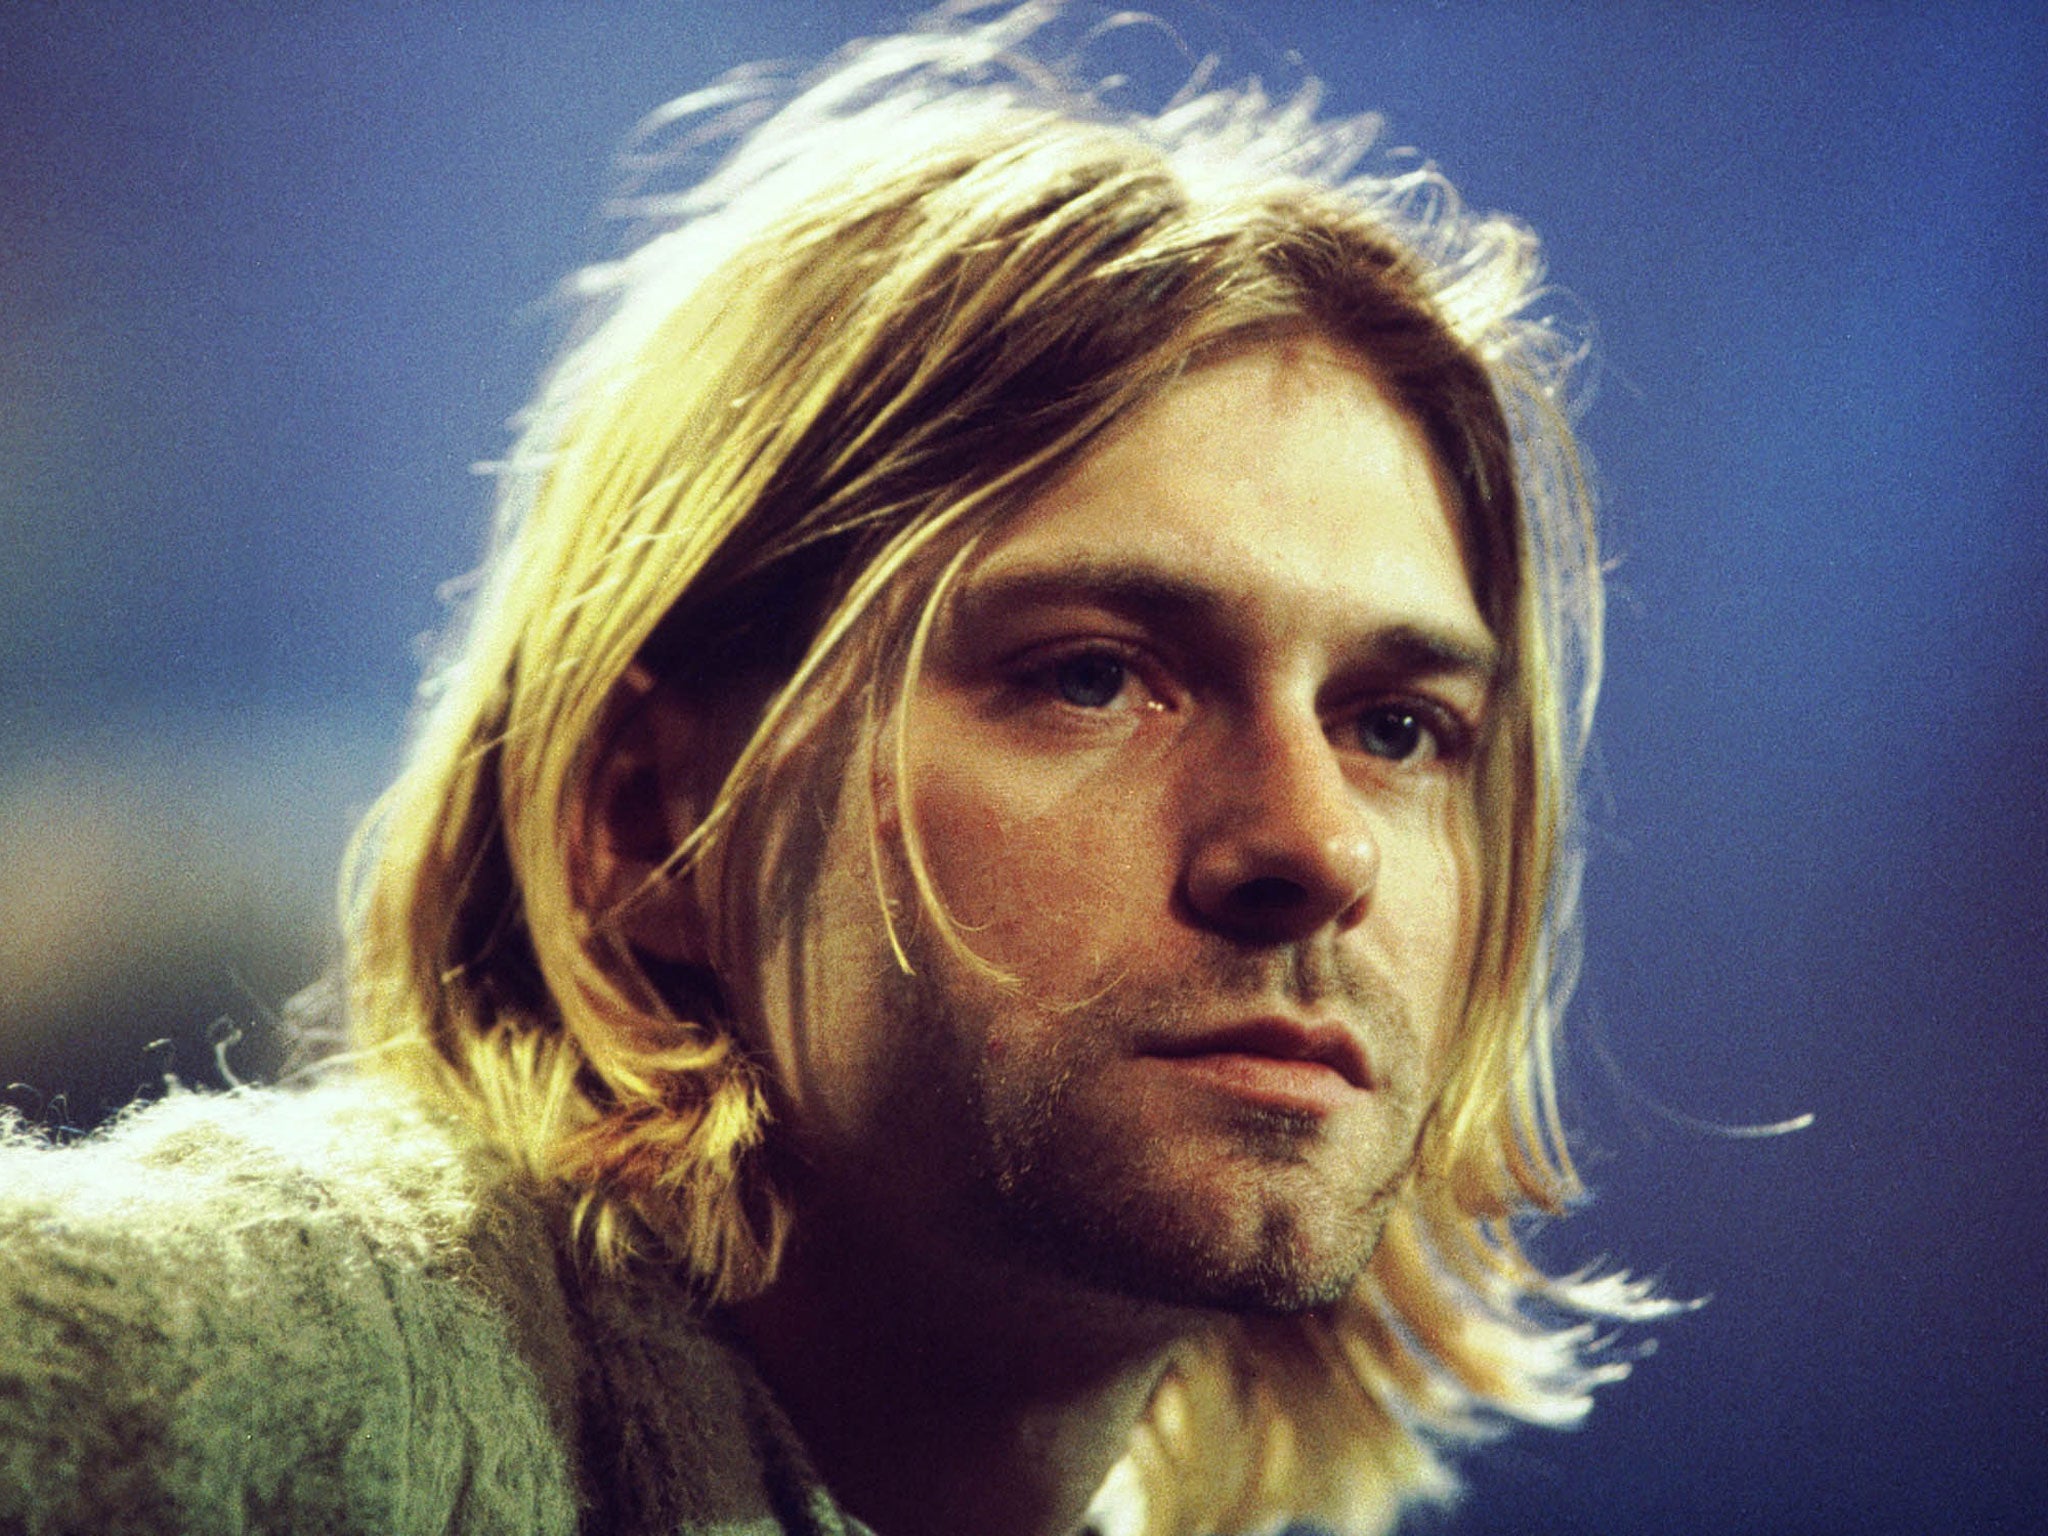 Kurt Cobain plays a gig with Nirvana in 1993, before his death the following year aged 27